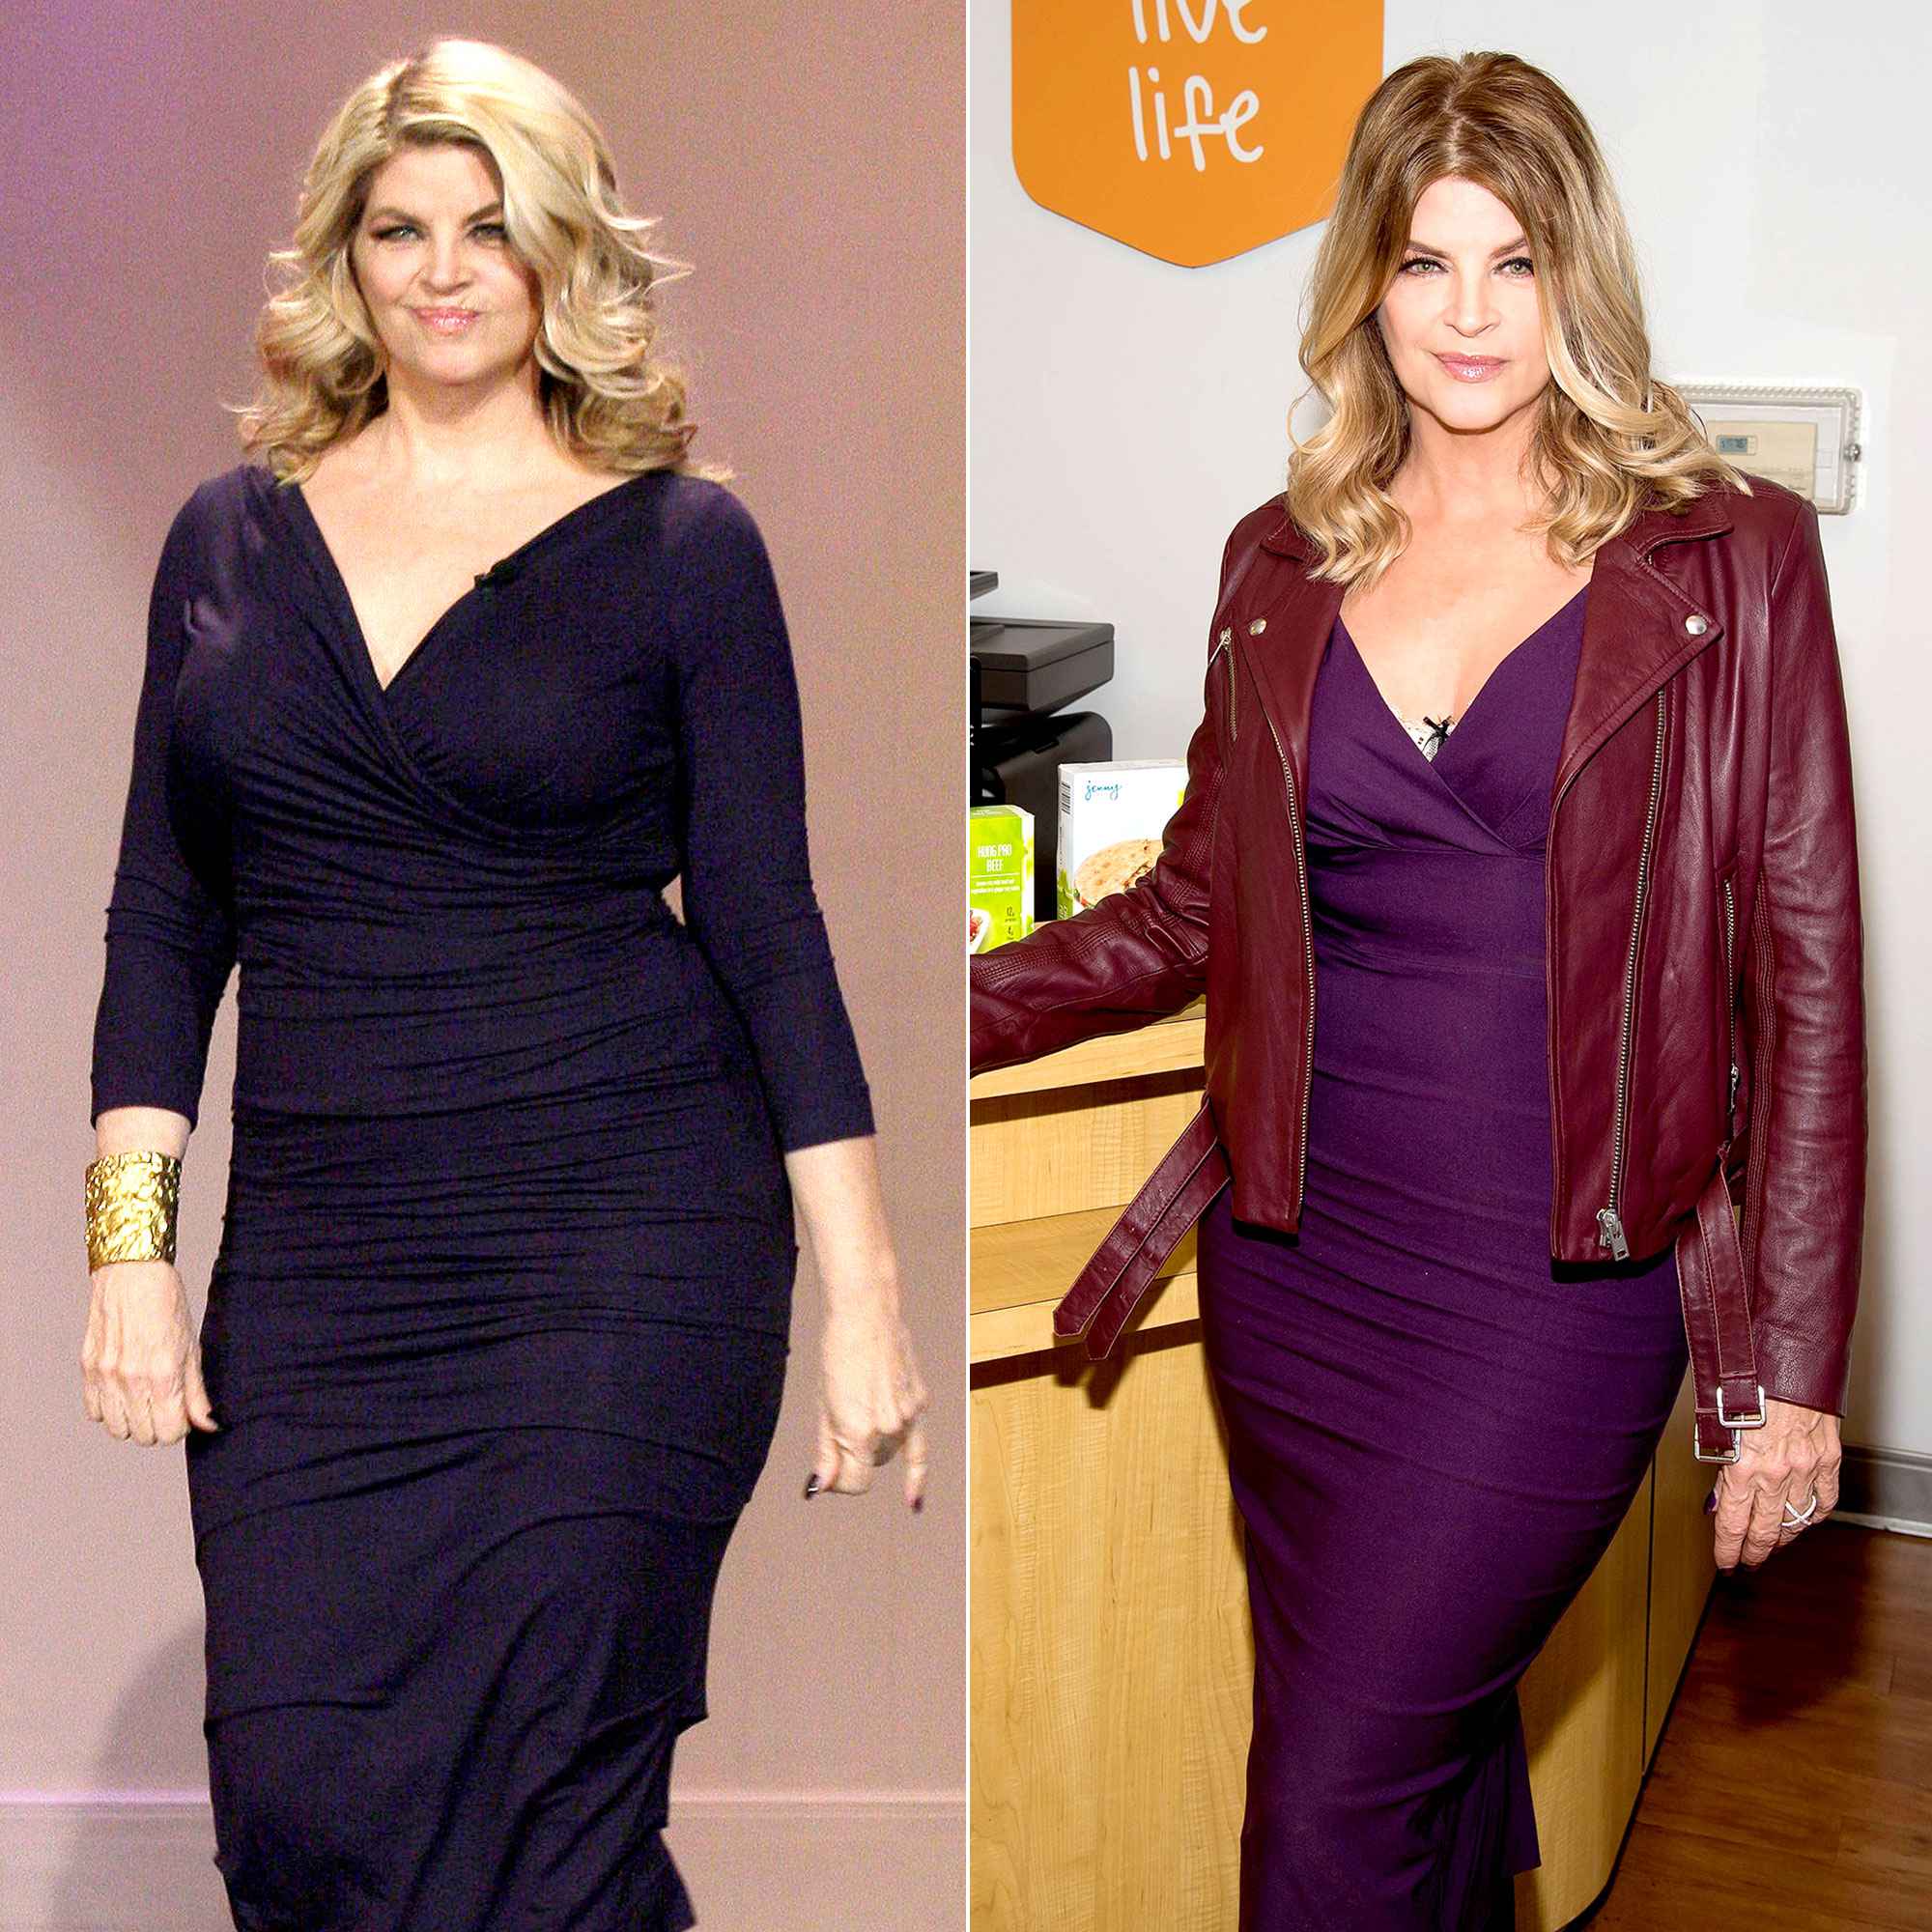 Kirstie Alley Reveals Crazy Weight Loss: Pics